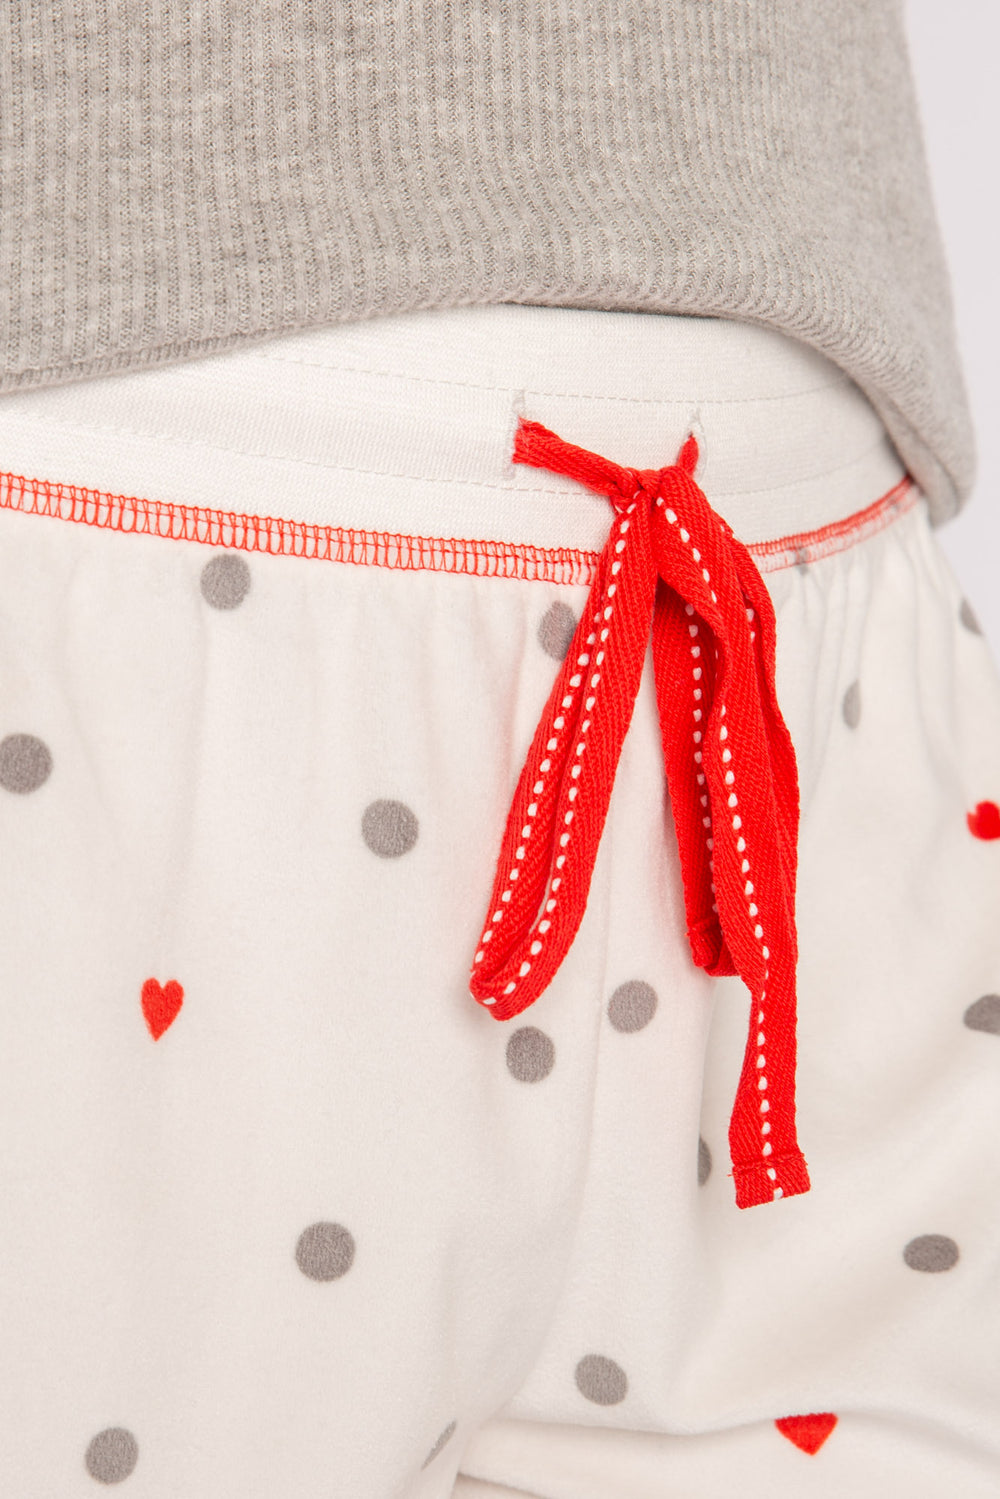 Silky velour knit pajama short in ivory-grey-red dot pattern. Contrast red stitching & red tie-waist (7257678315620)